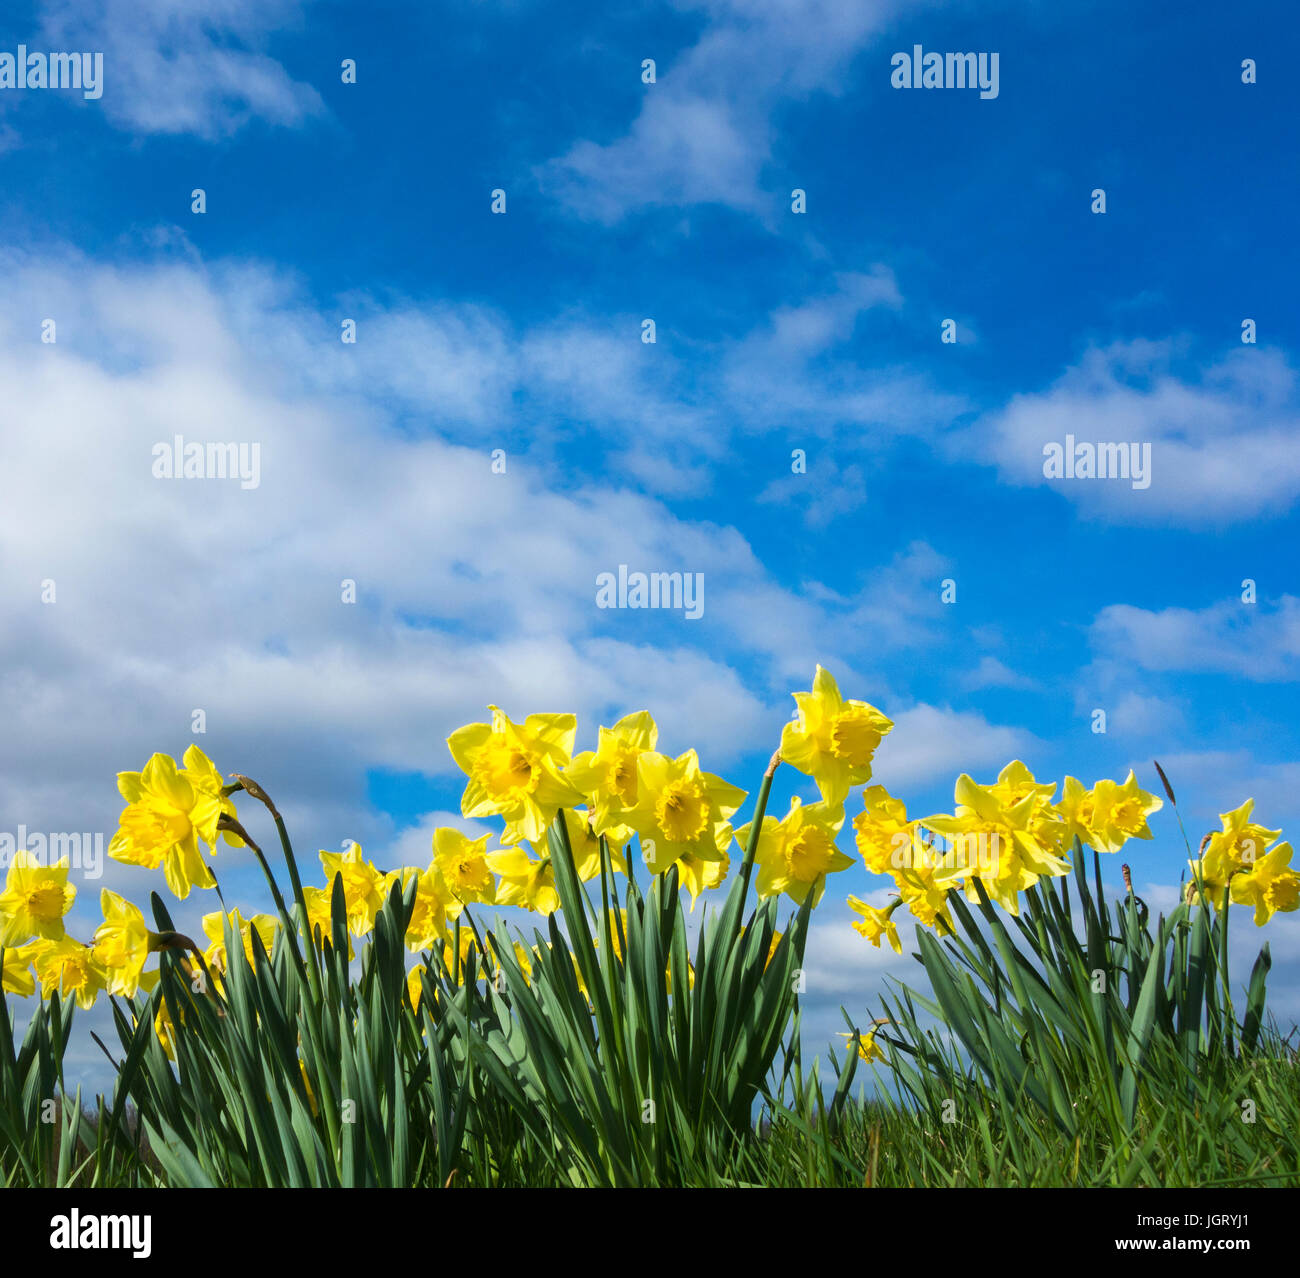 Daffodils against blue sky. Stock Photo